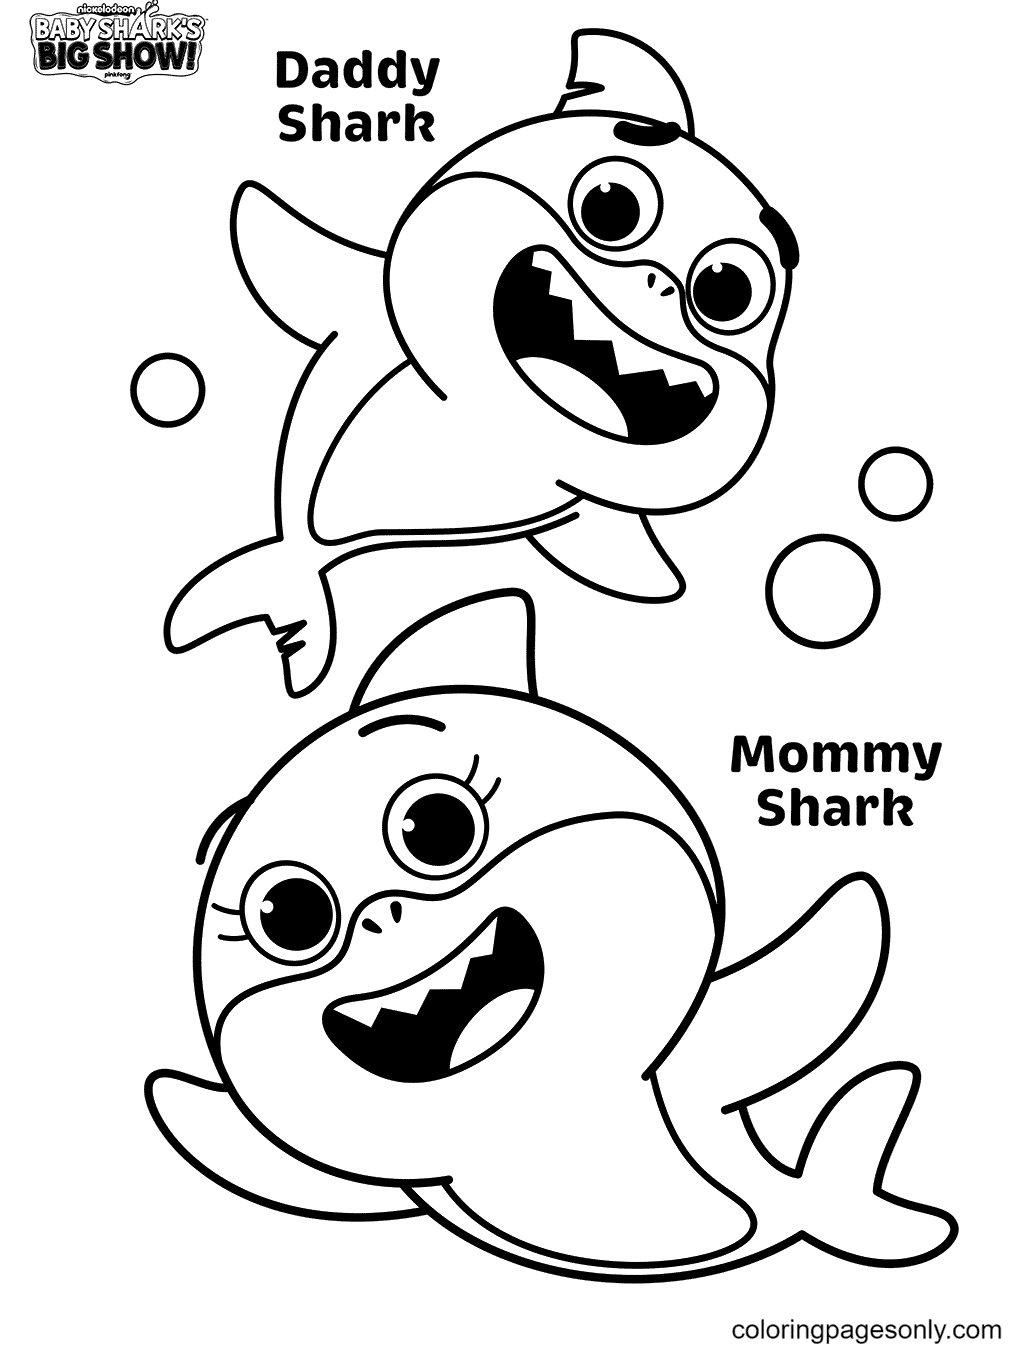 Daddy Shark and Mommy Shark Coloring Pages